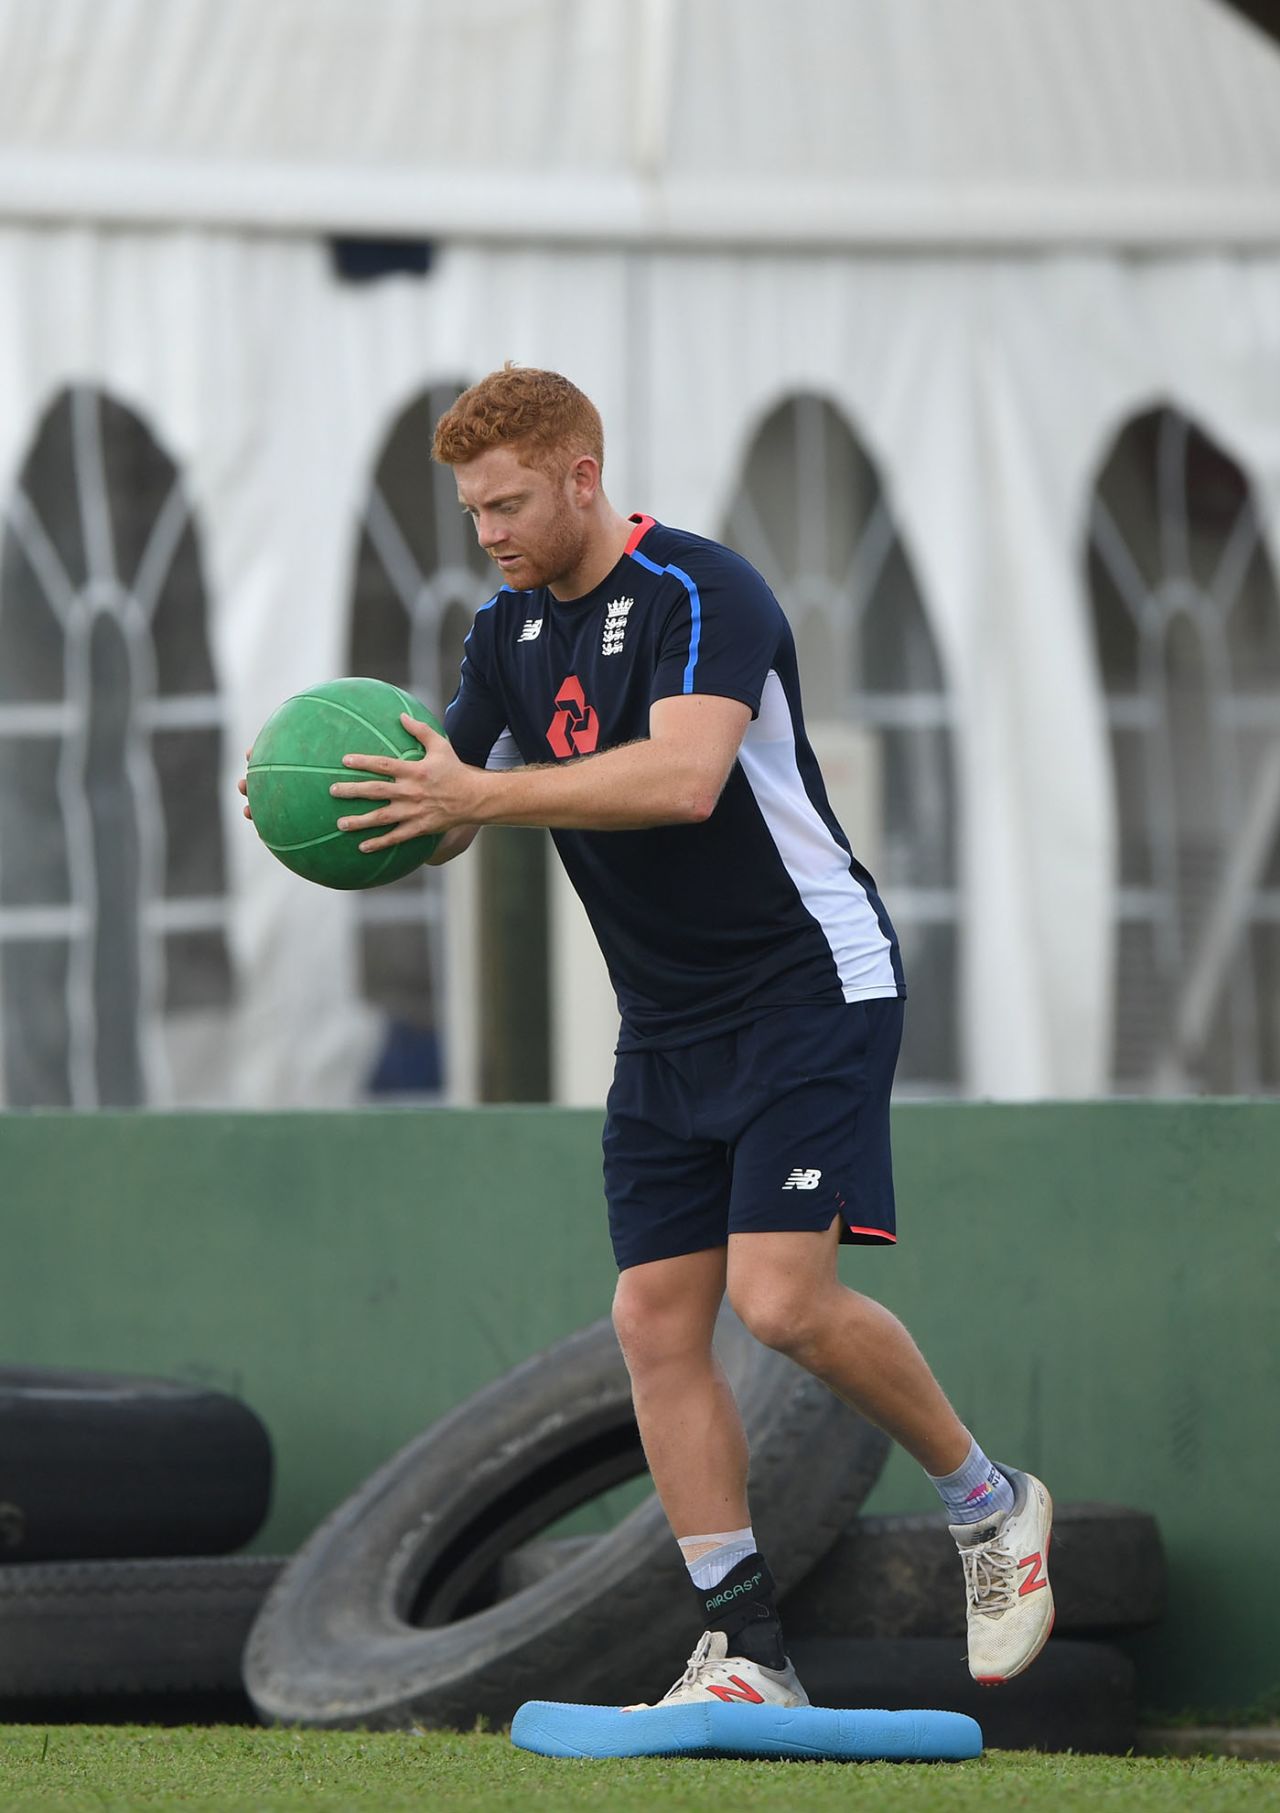 Jonny Bairstow was back in training after an ankle injury, Galle, November 4, 2018